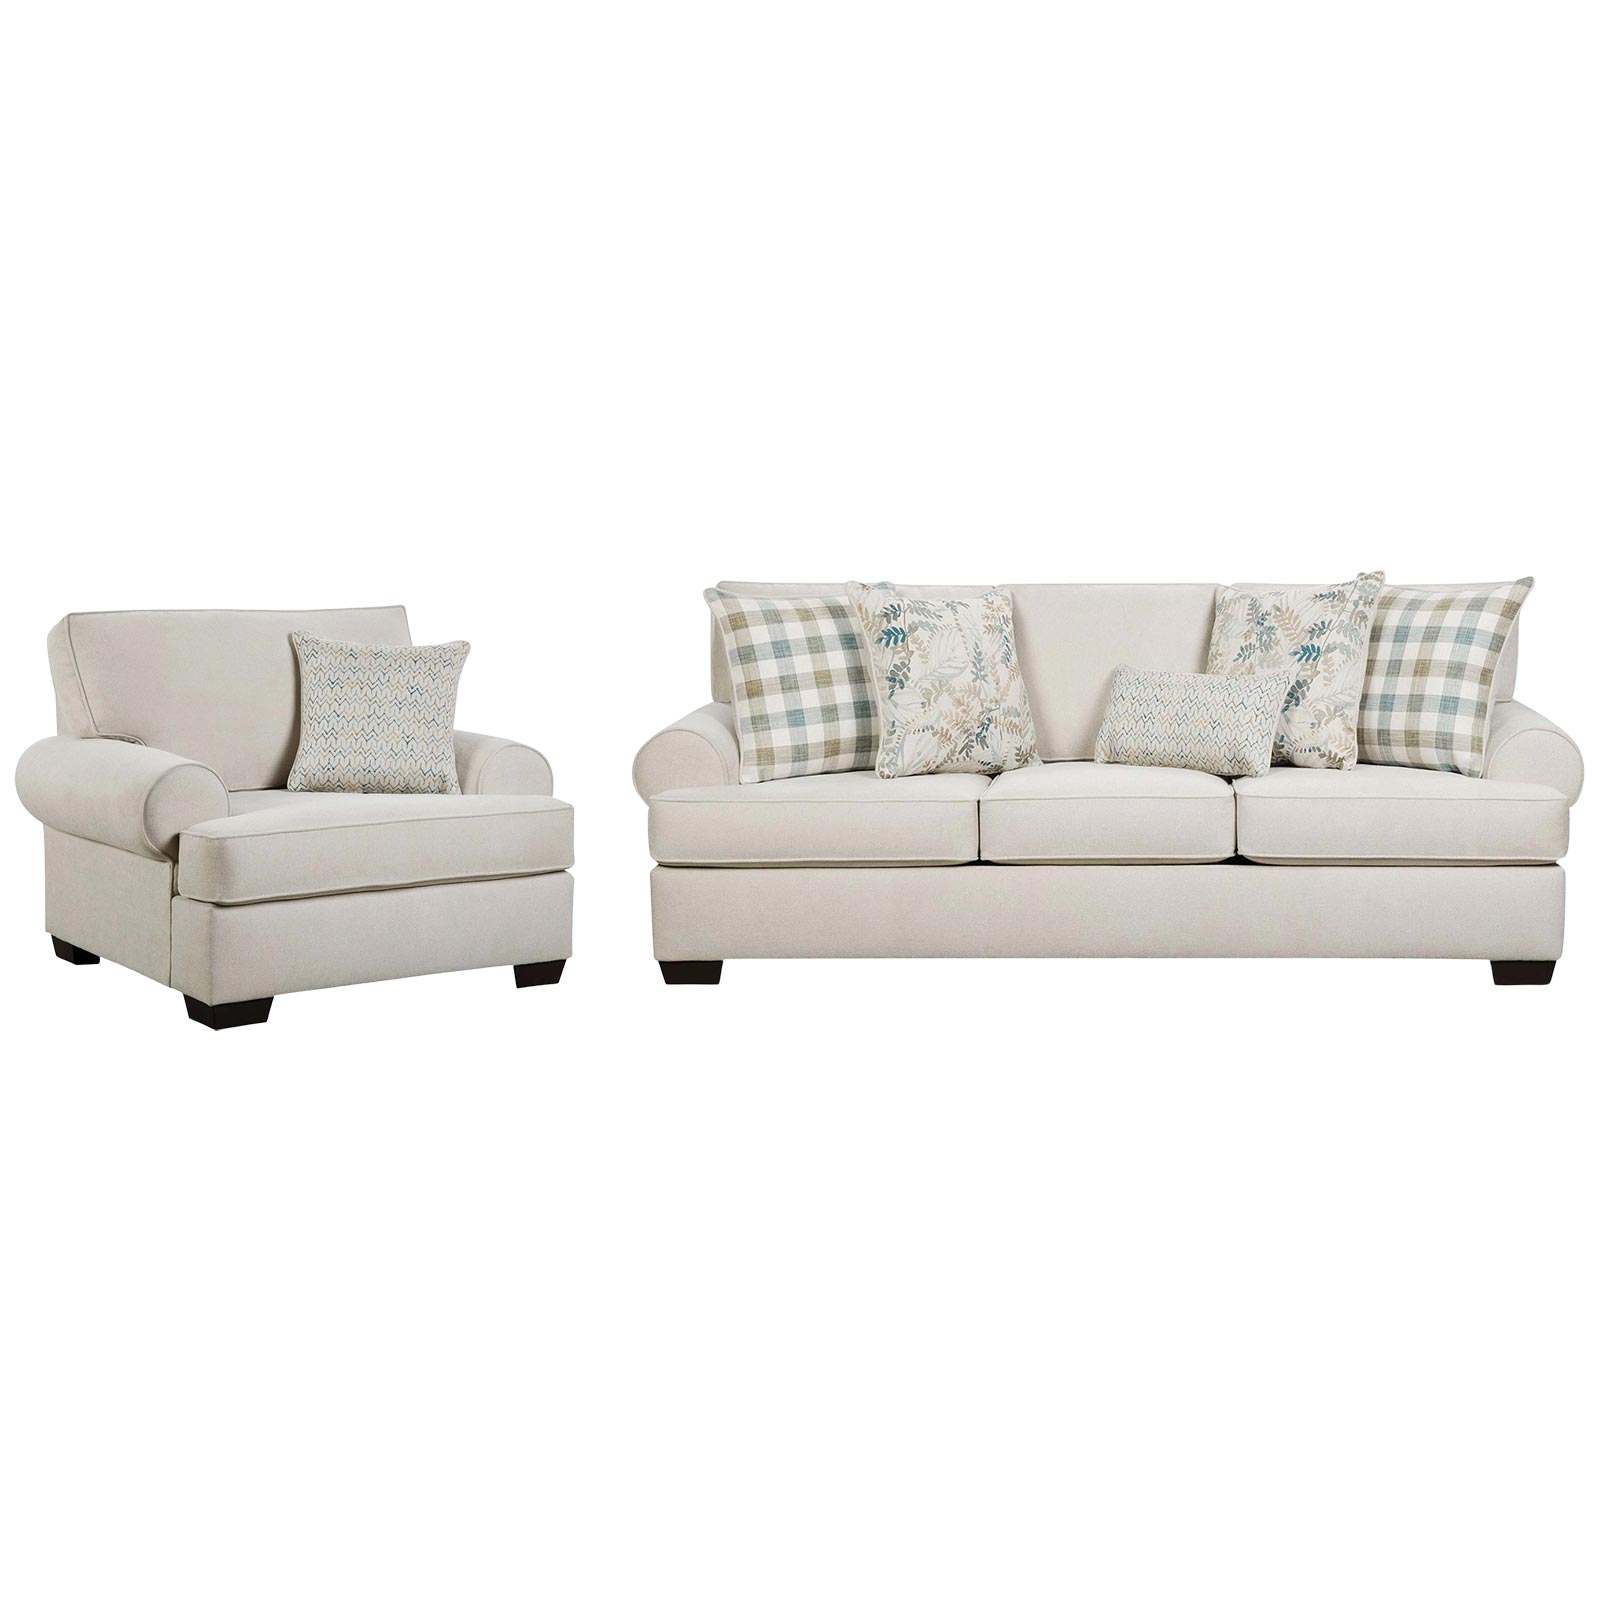 Behold Home Feather Cream Sofa and Chair